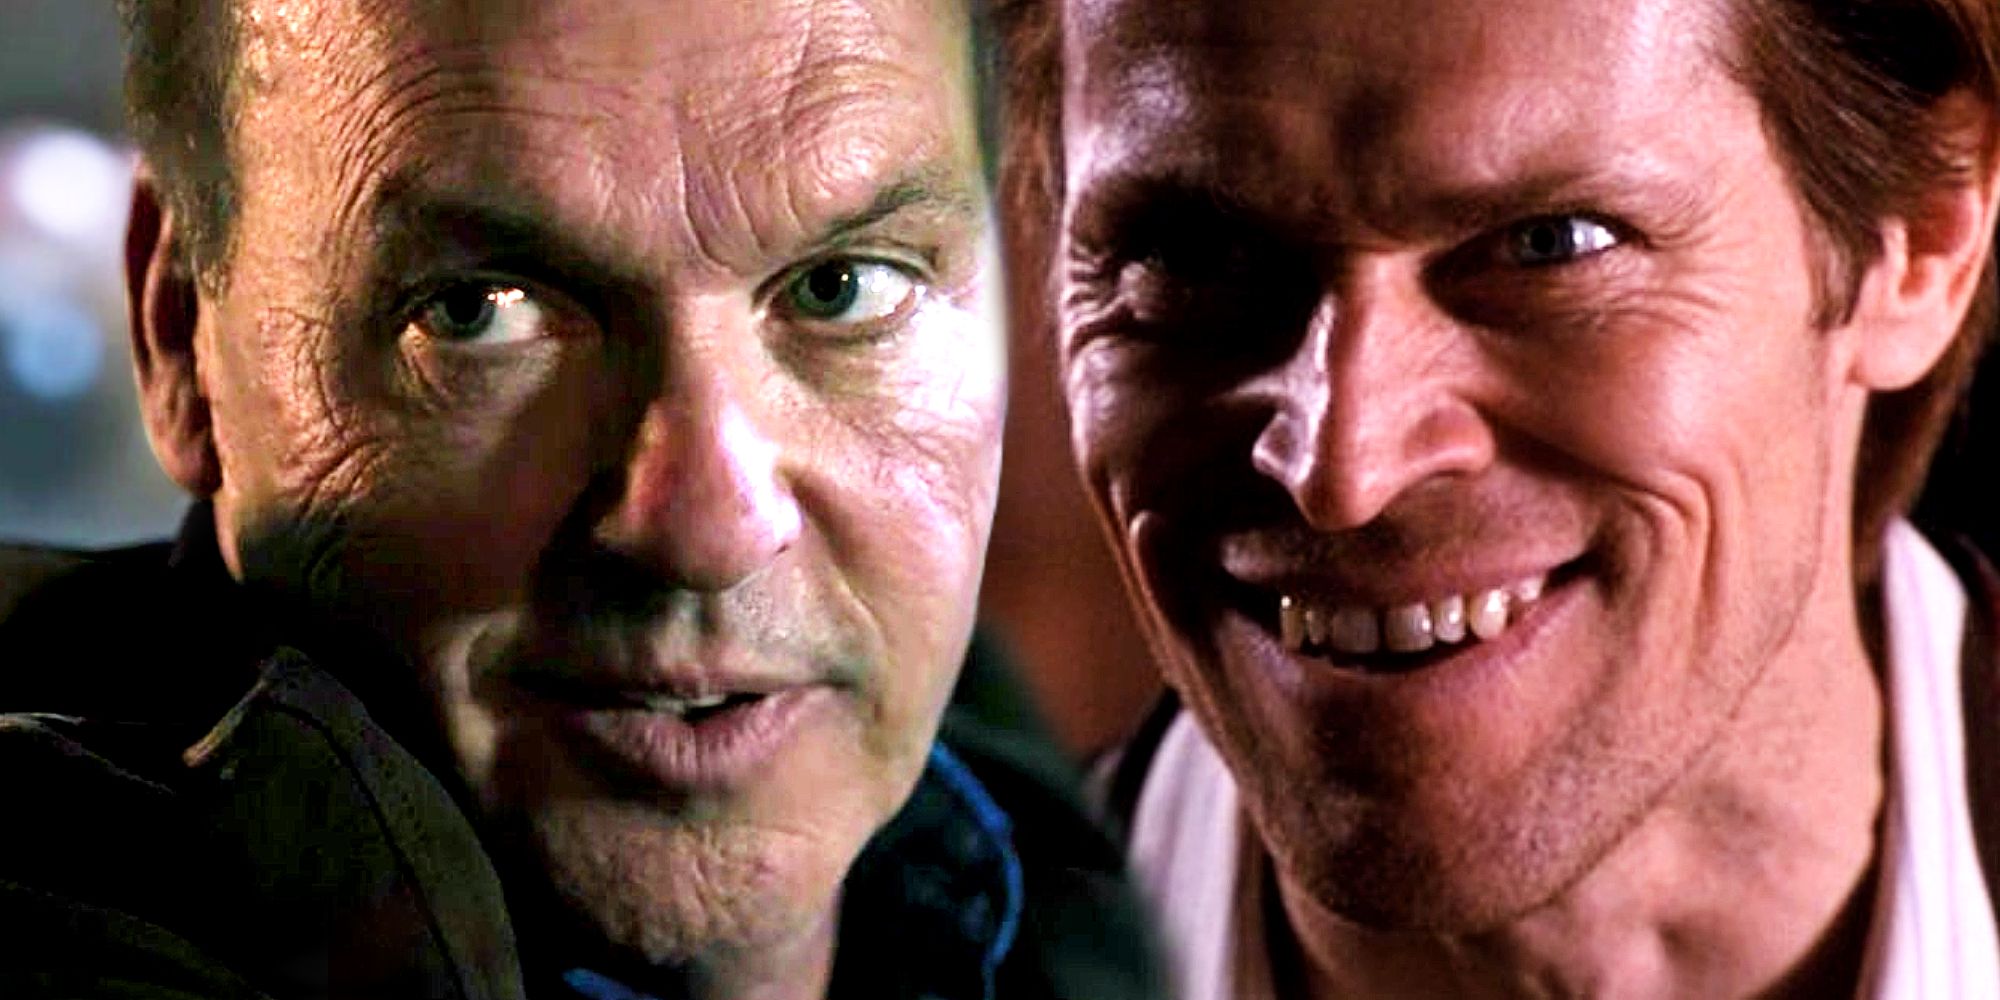 Michael Keaton Stares Menacingly as Vulture in Spider-Man Homecoming and Willem Dafoe Smiles as Green Goblin in Sam Raimi's Spider-Man